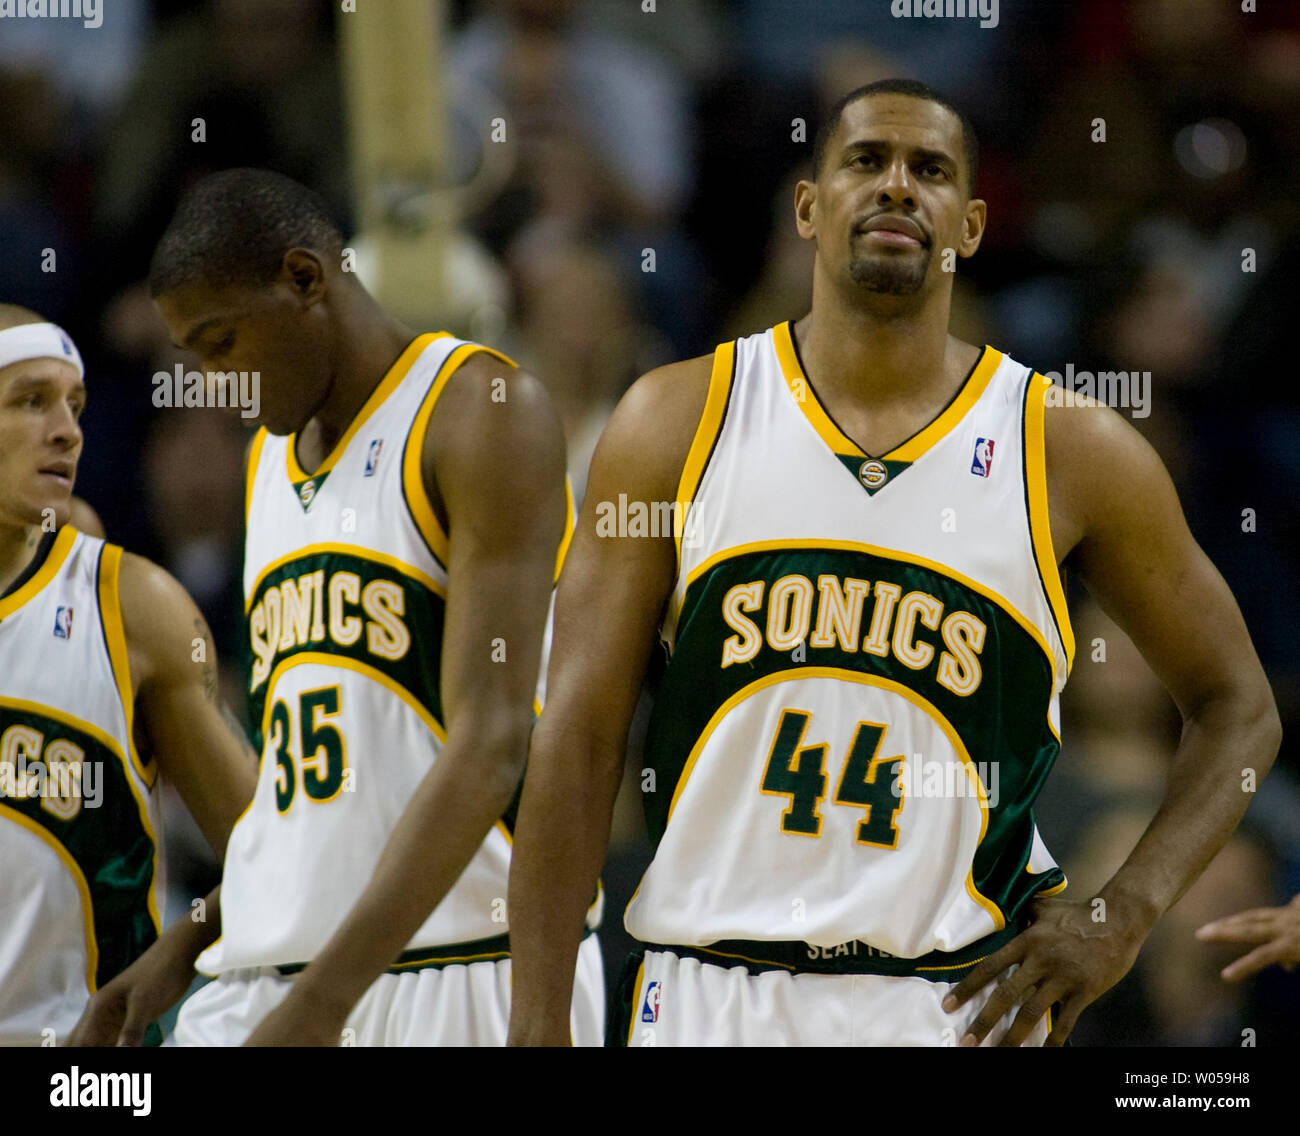 Seattle SuperSonics' Kurt Thomas (R) shows his frustration after being called for a foul against New York Knicks' Zach Randolph during the second half at the Key Arena in Seattle on February 2, 2008. The SuperSonics beat the Knicks 86-85. (UPI Photo/Jim Bryant) Stock Photo